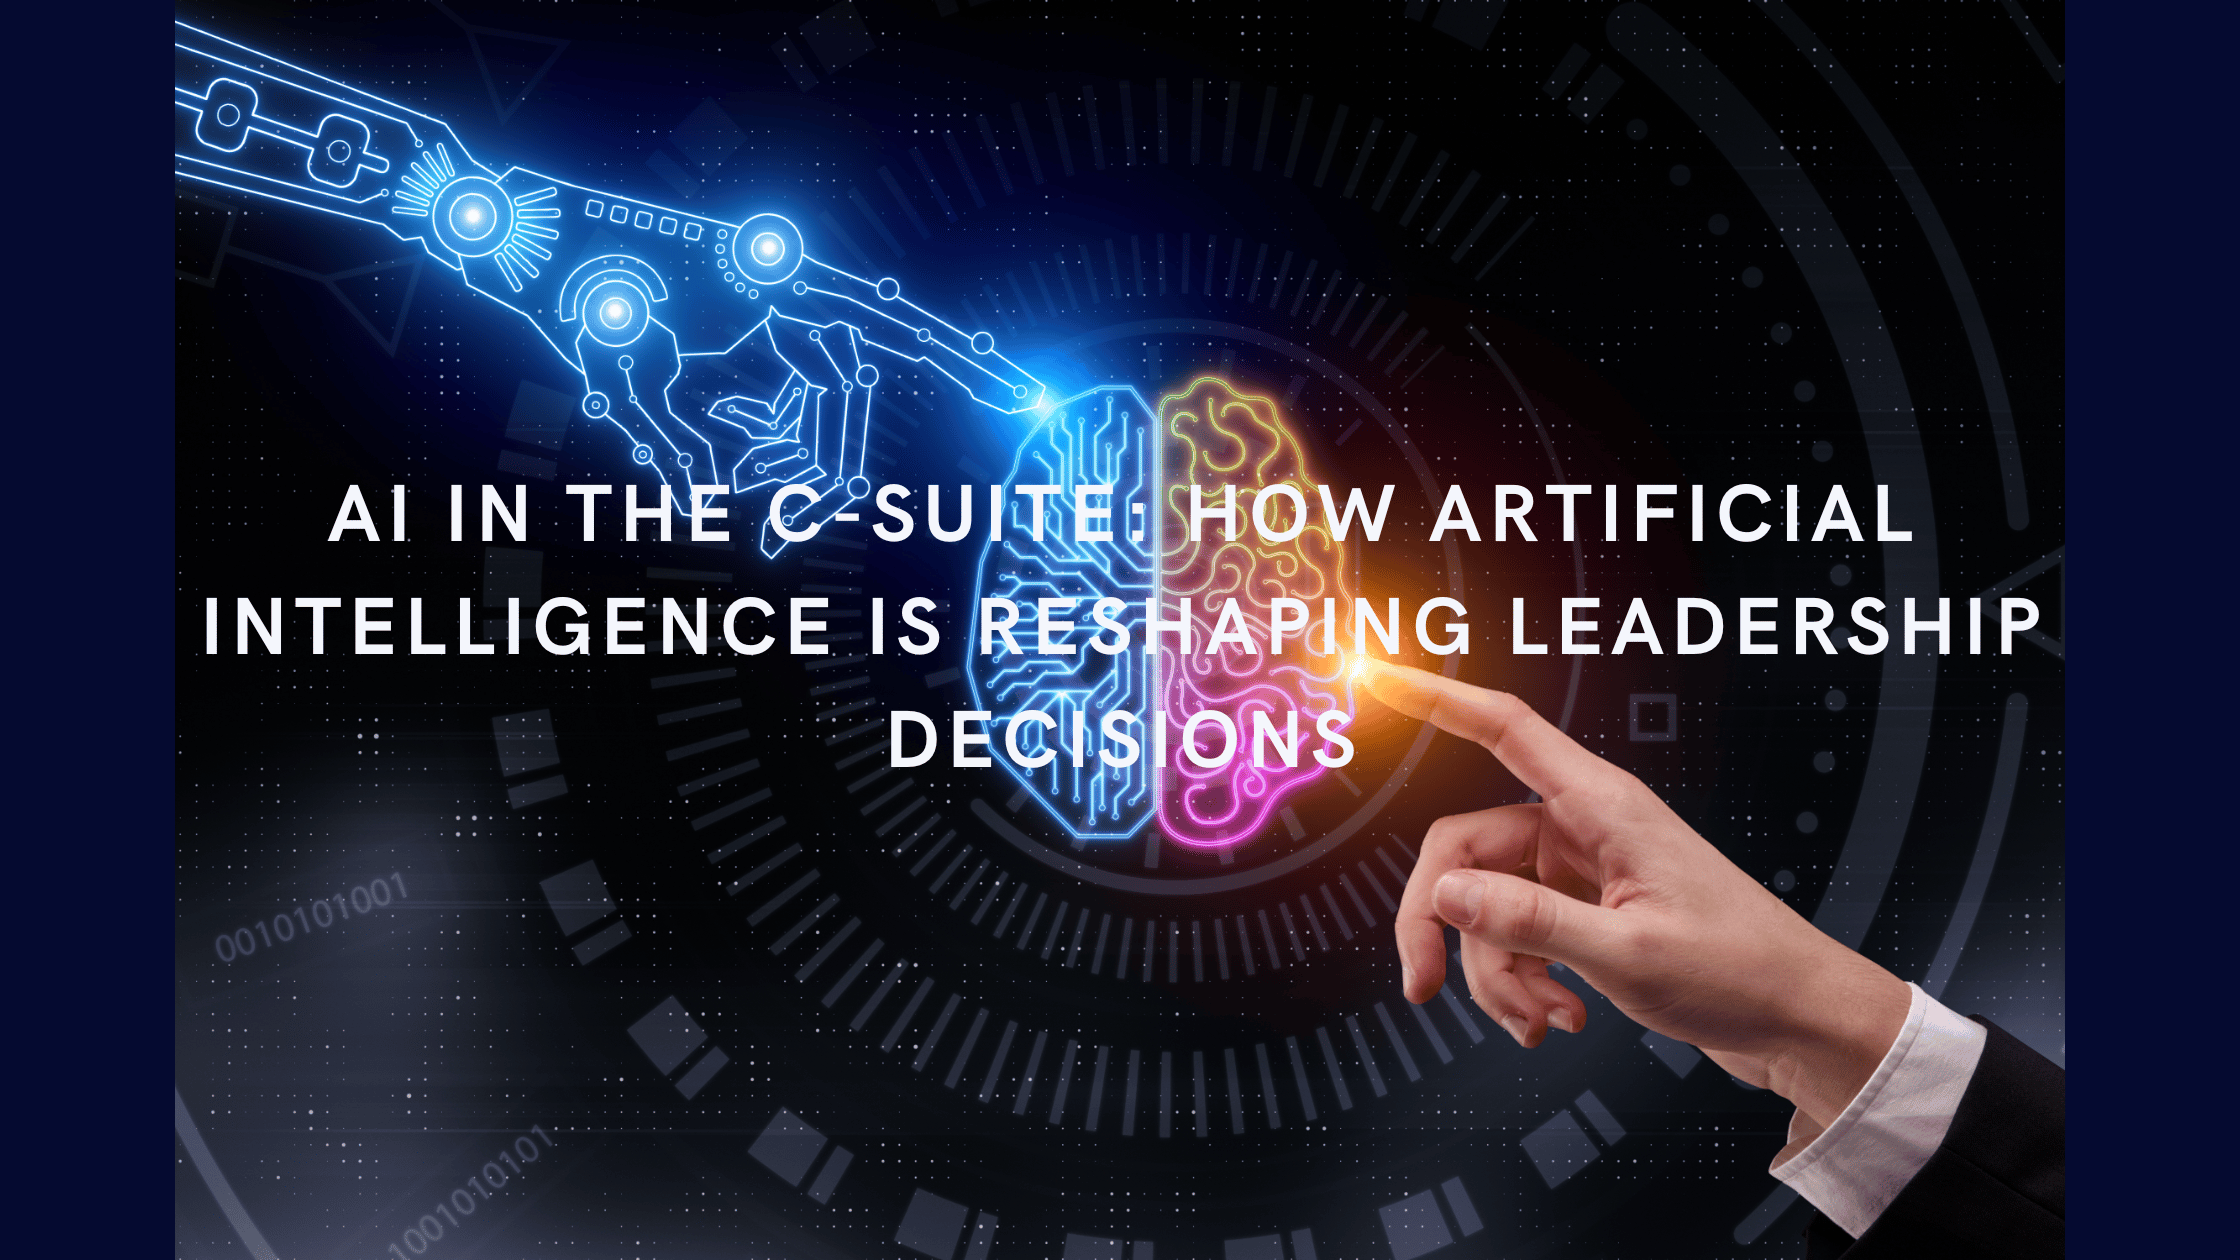 AI in the C-Suite: How Artificial Intelligence is Reshaping Leadership Decisions